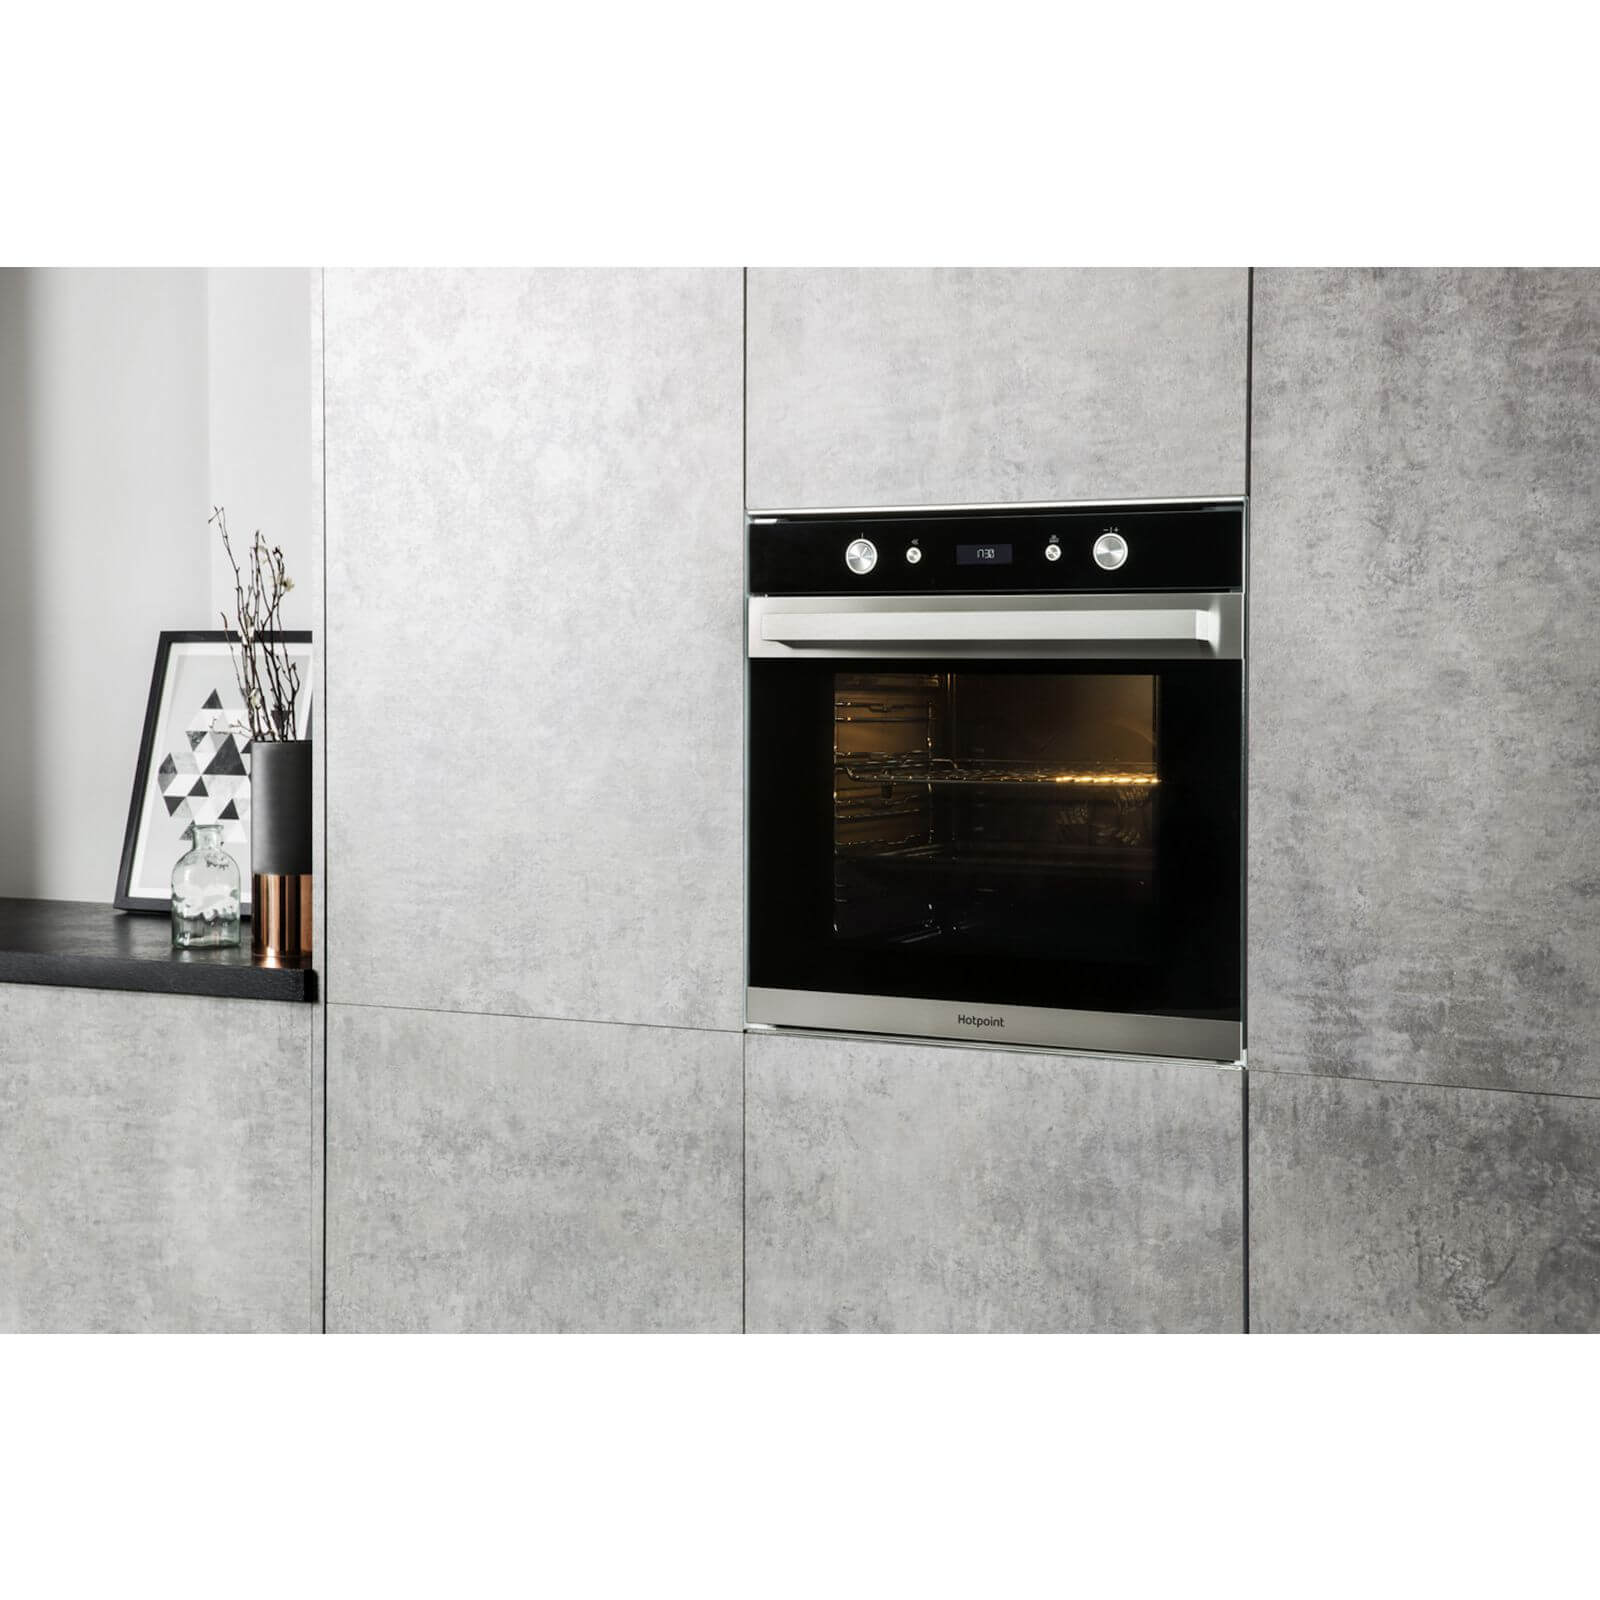 Hotpoint Class 7 SI7 864 SC IX Built-in Single Electric Oven - Stainless Steel